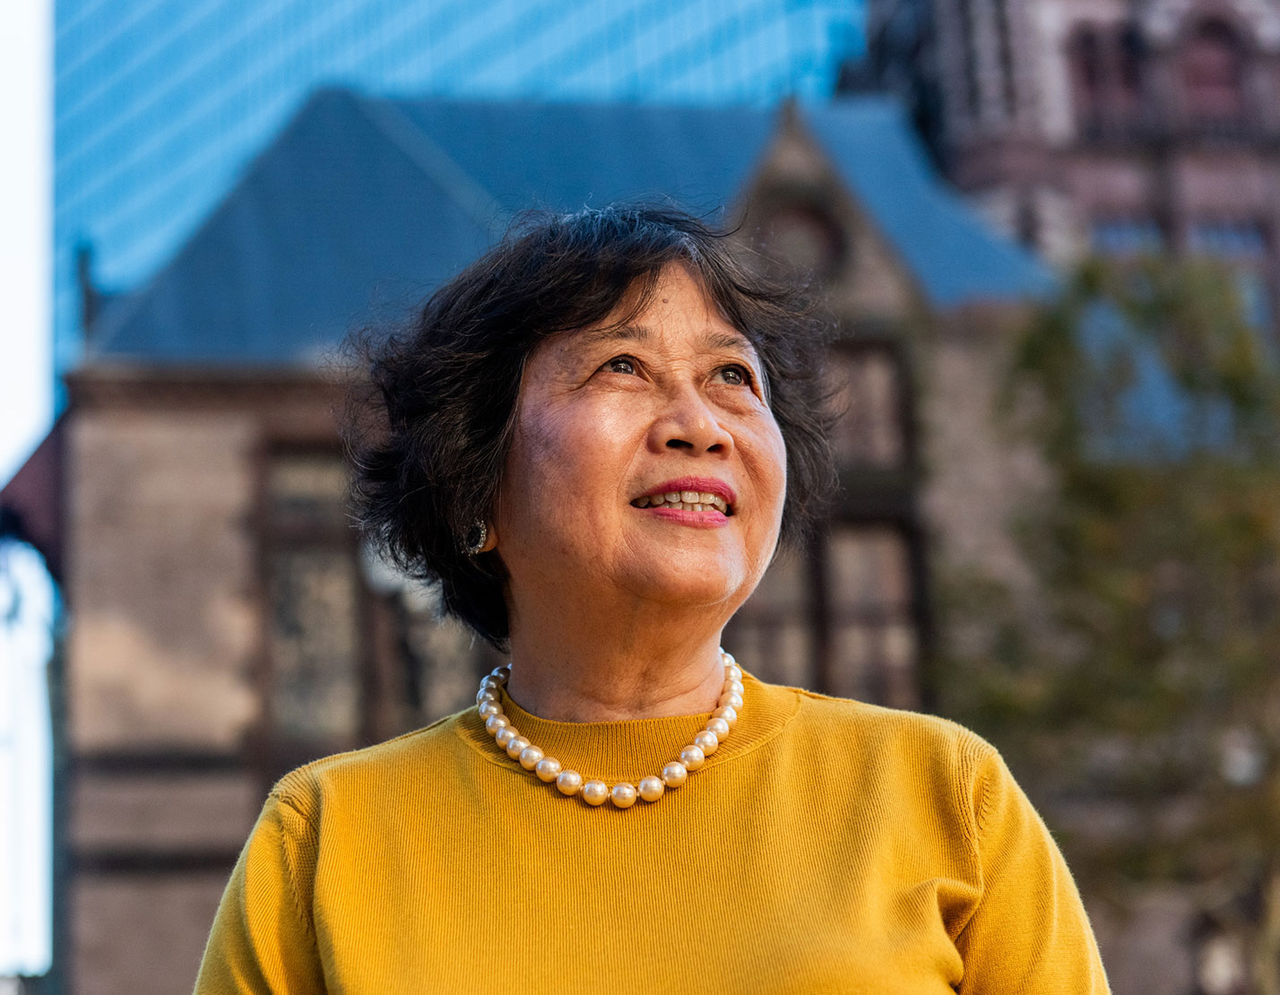 An older Chinese woman in downtown Boston.